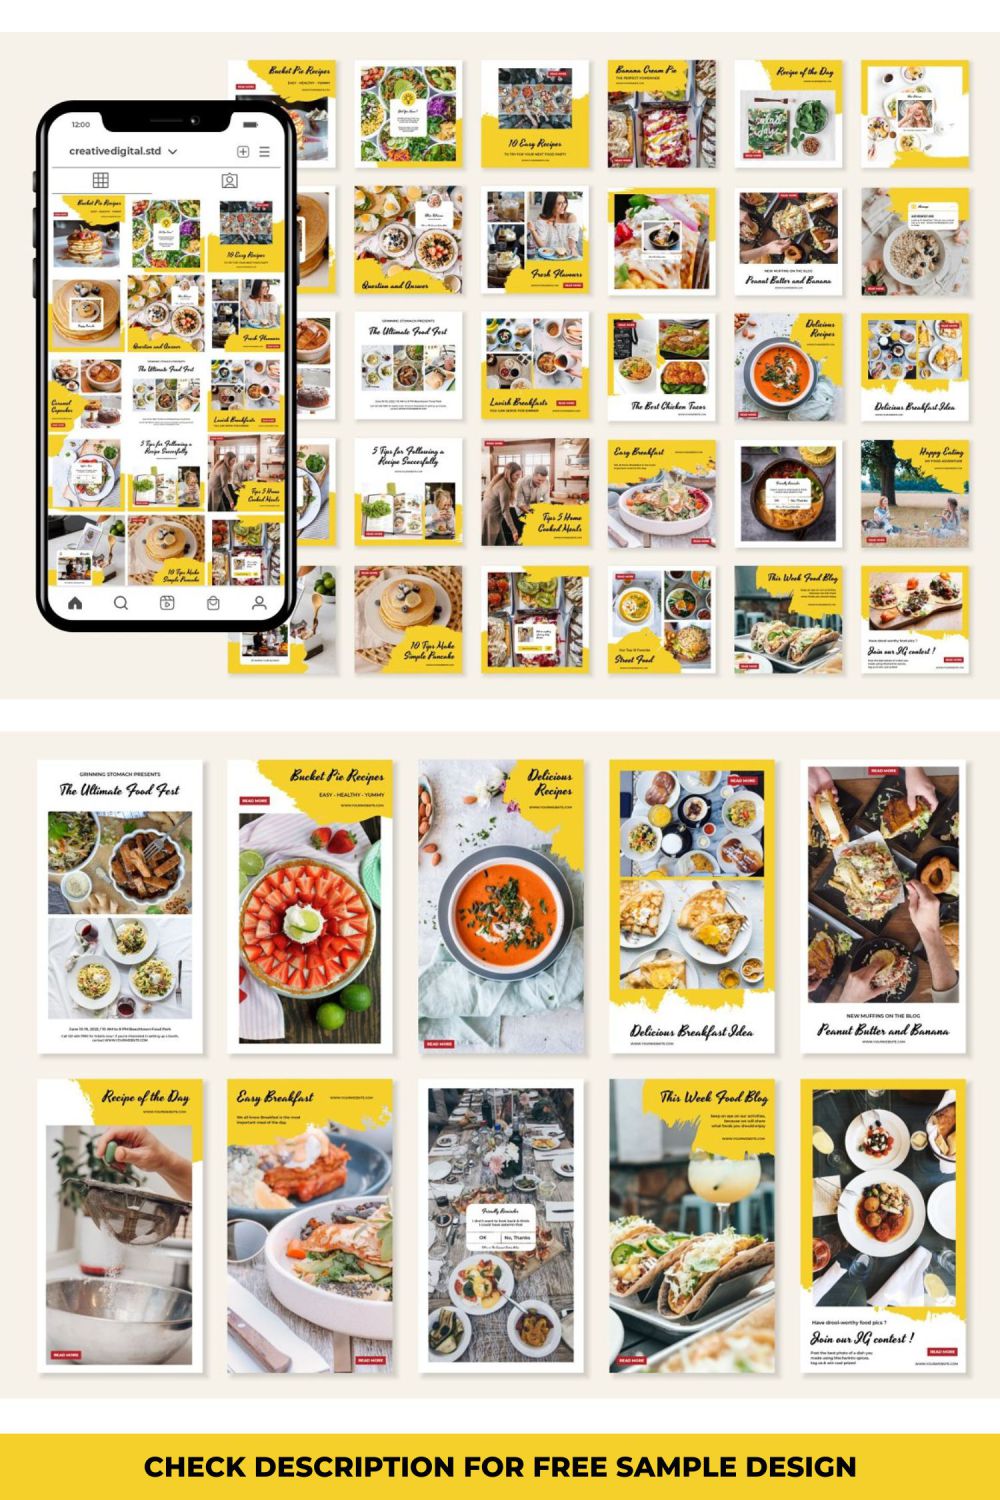 Restaurant Food Blogger Story And Icon Social Media Template Pinterest Image.